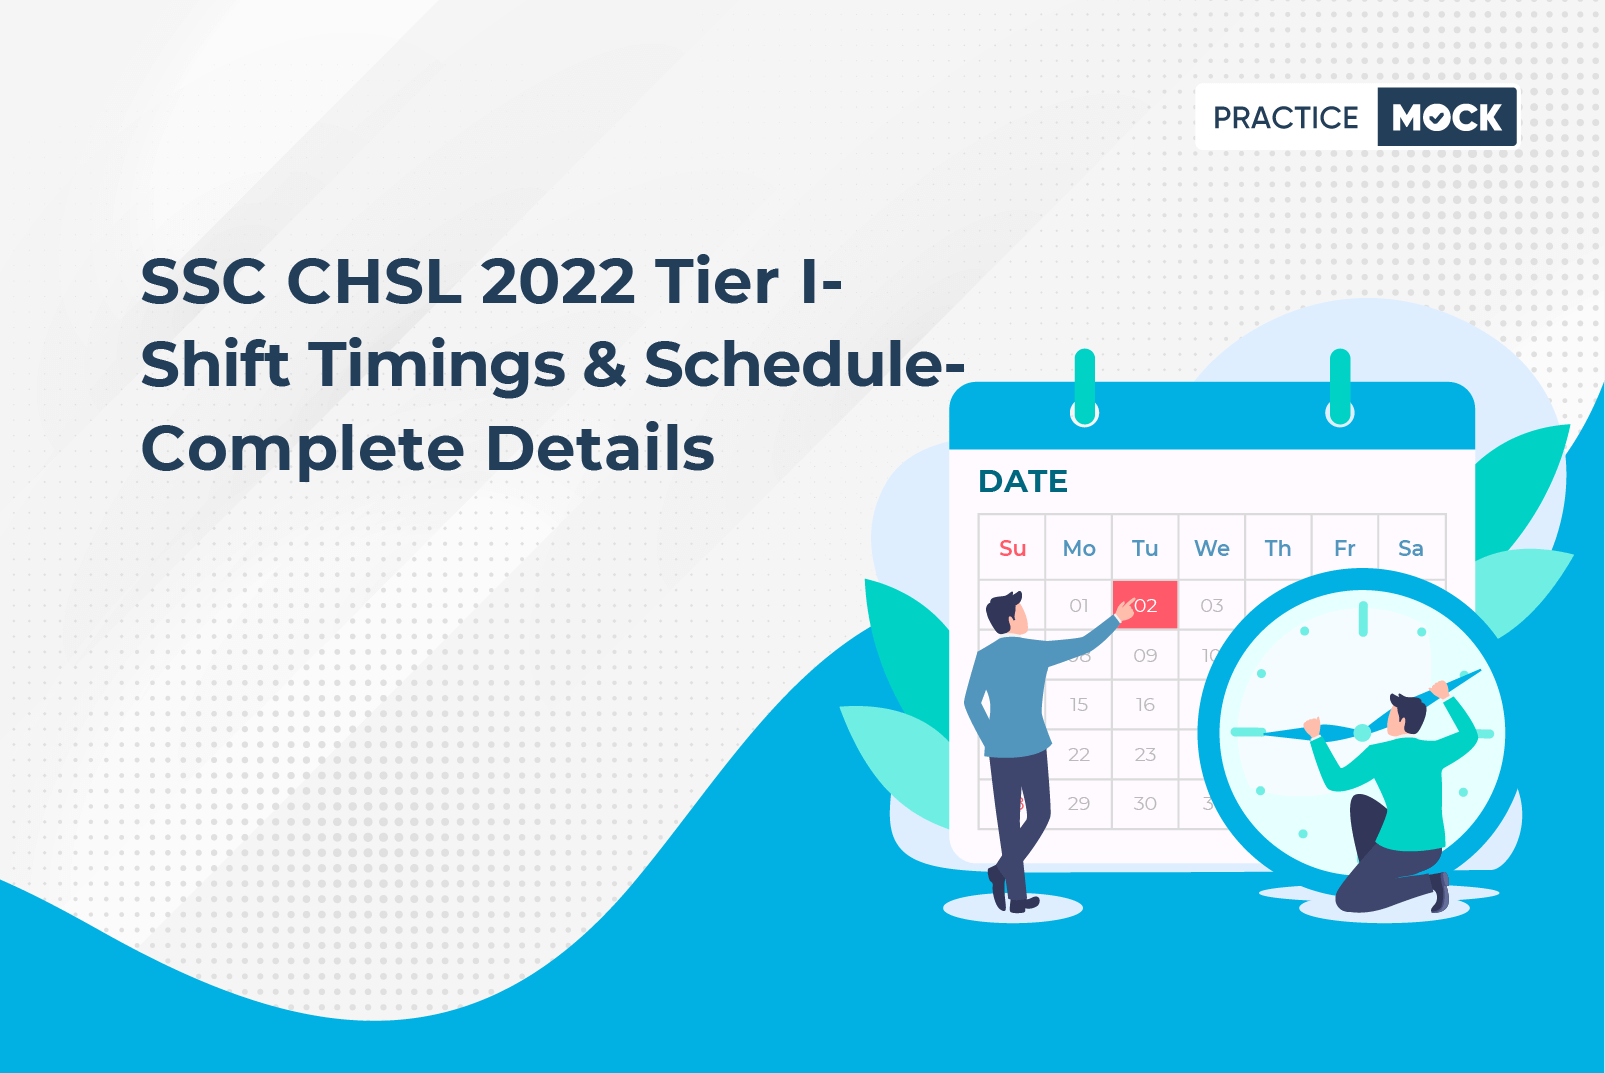 SSC CHSL 2022 Tier I- Shift Timings & Schedule- Complete Details